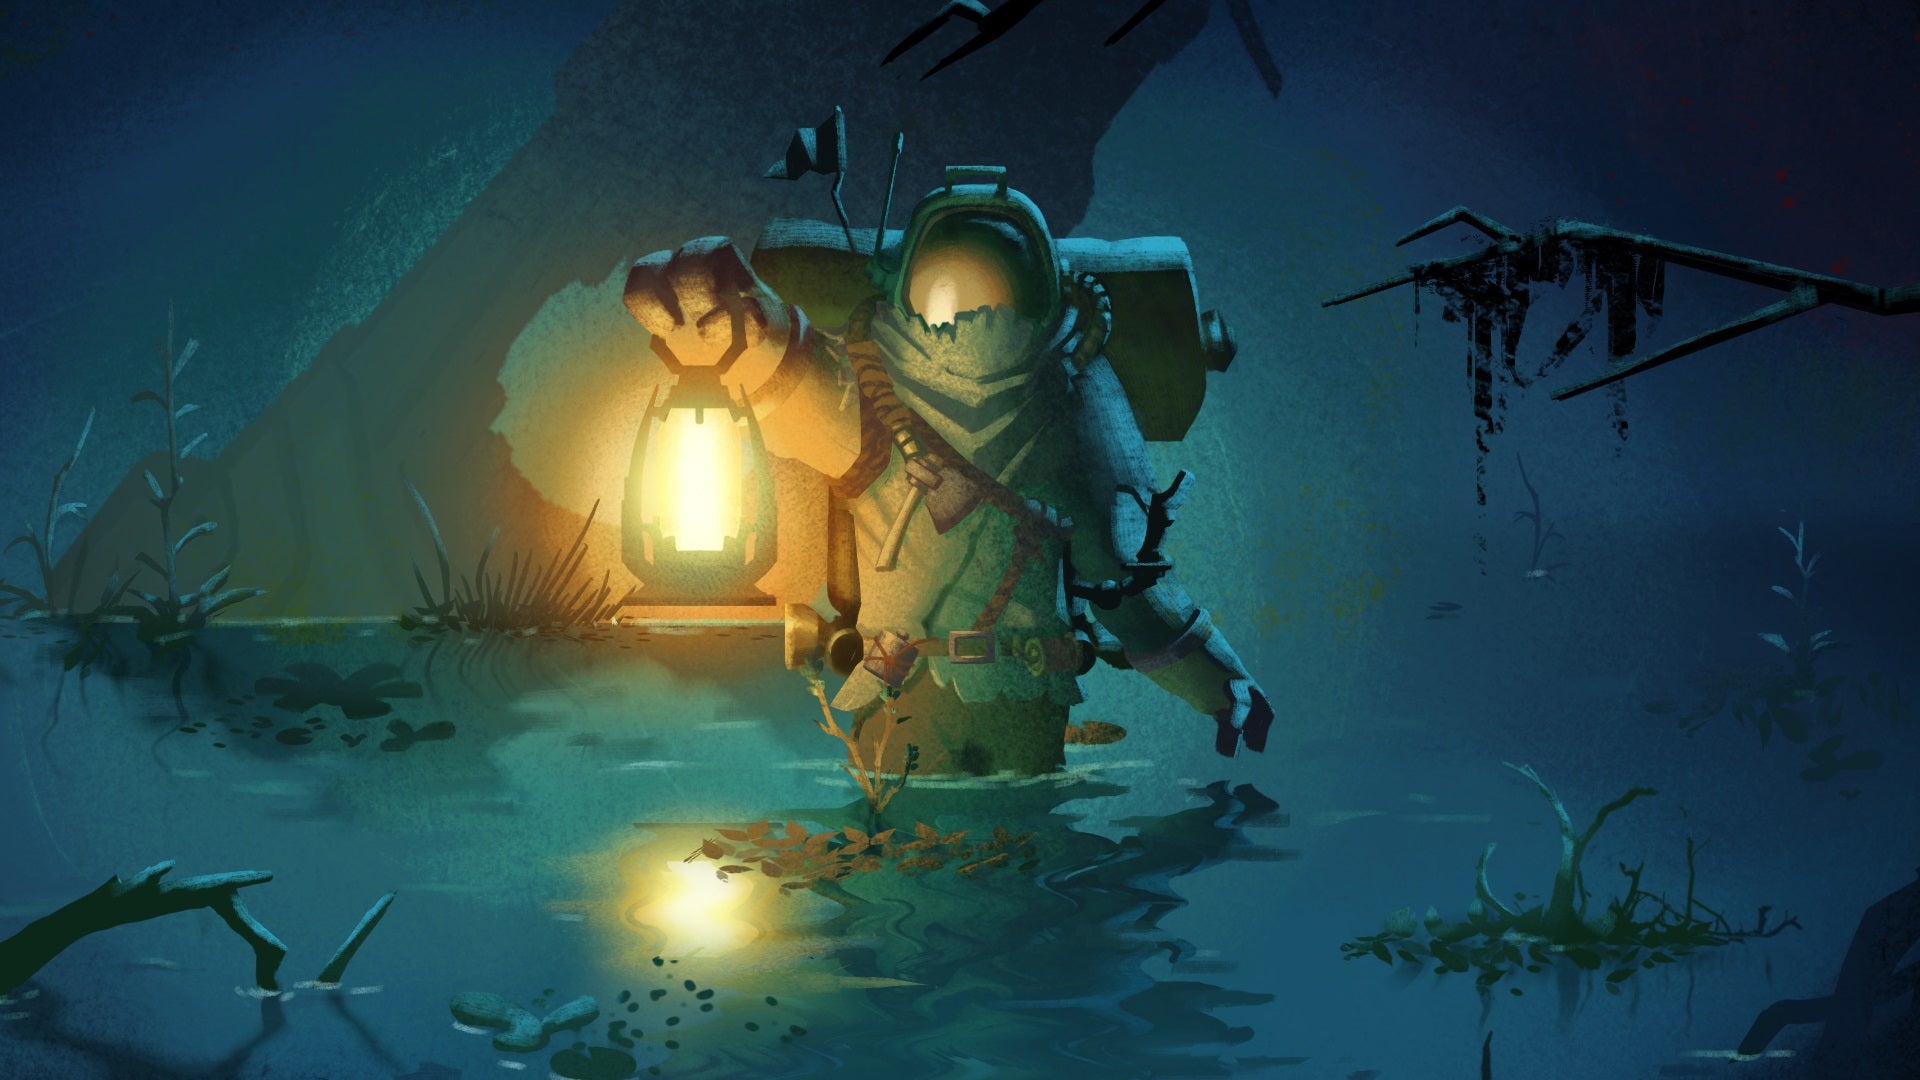 A space man from Outer Wilds trudging through some water with a lantern.